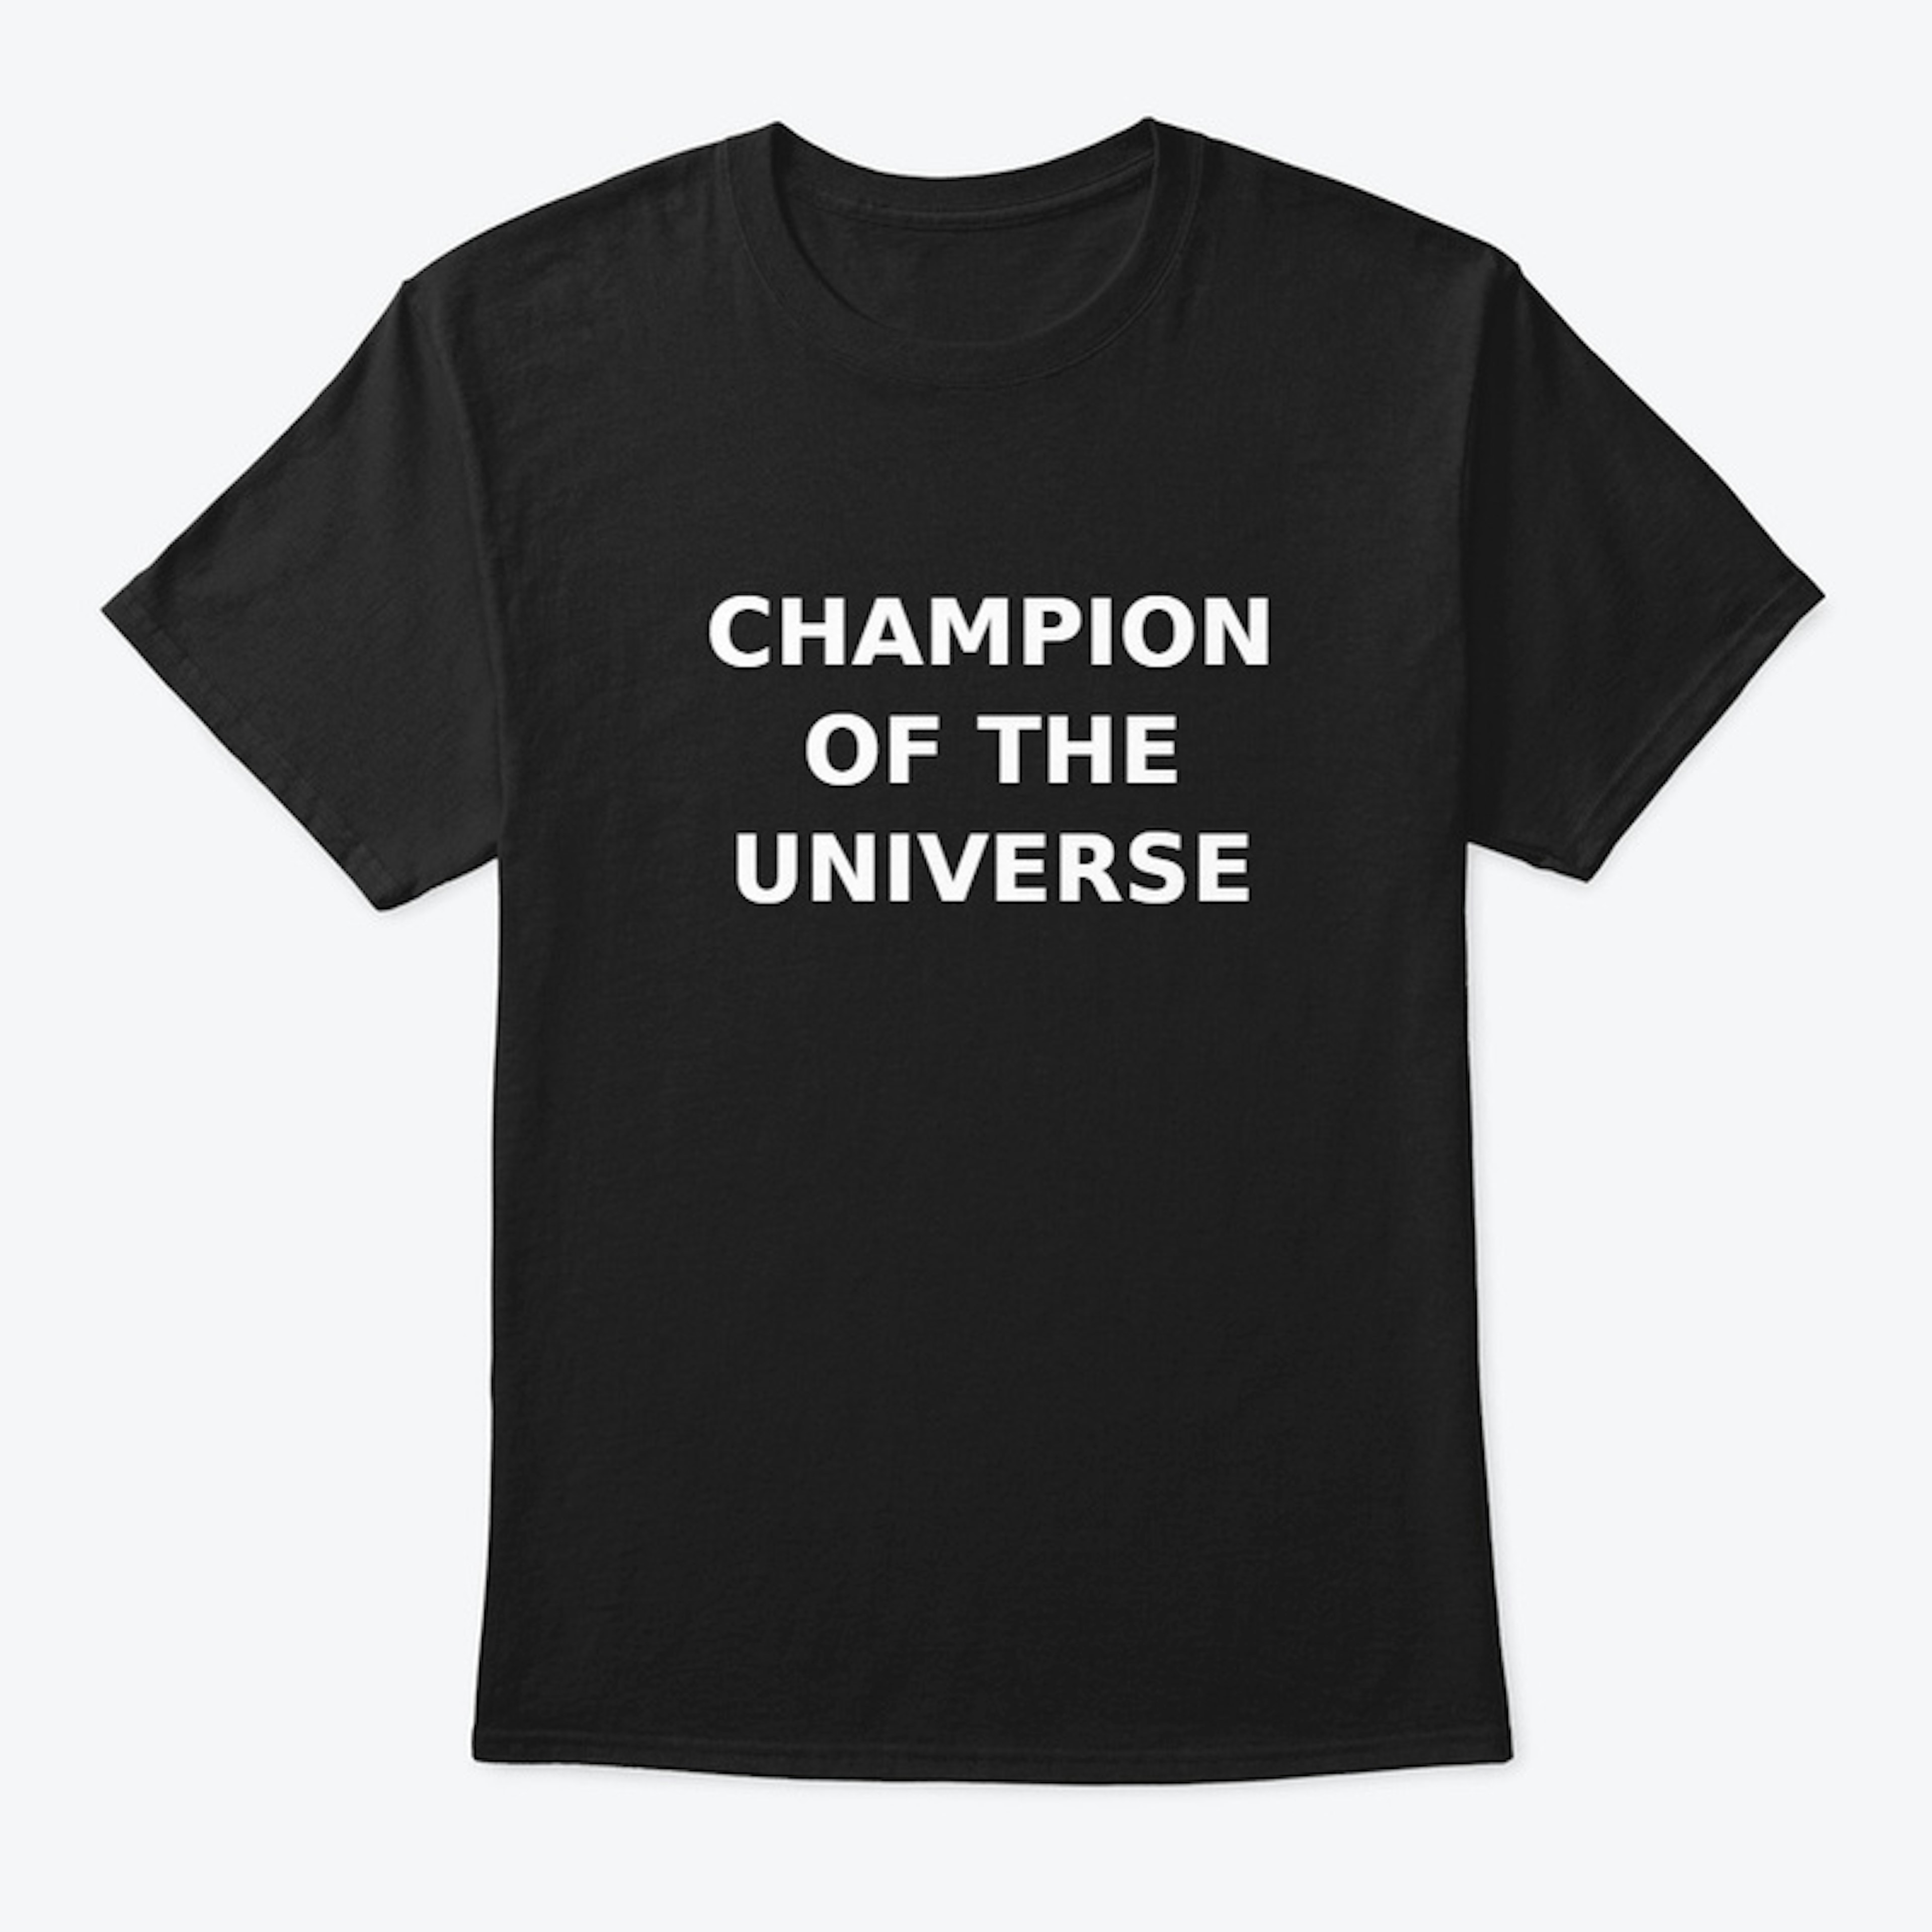 Champion of the Universe